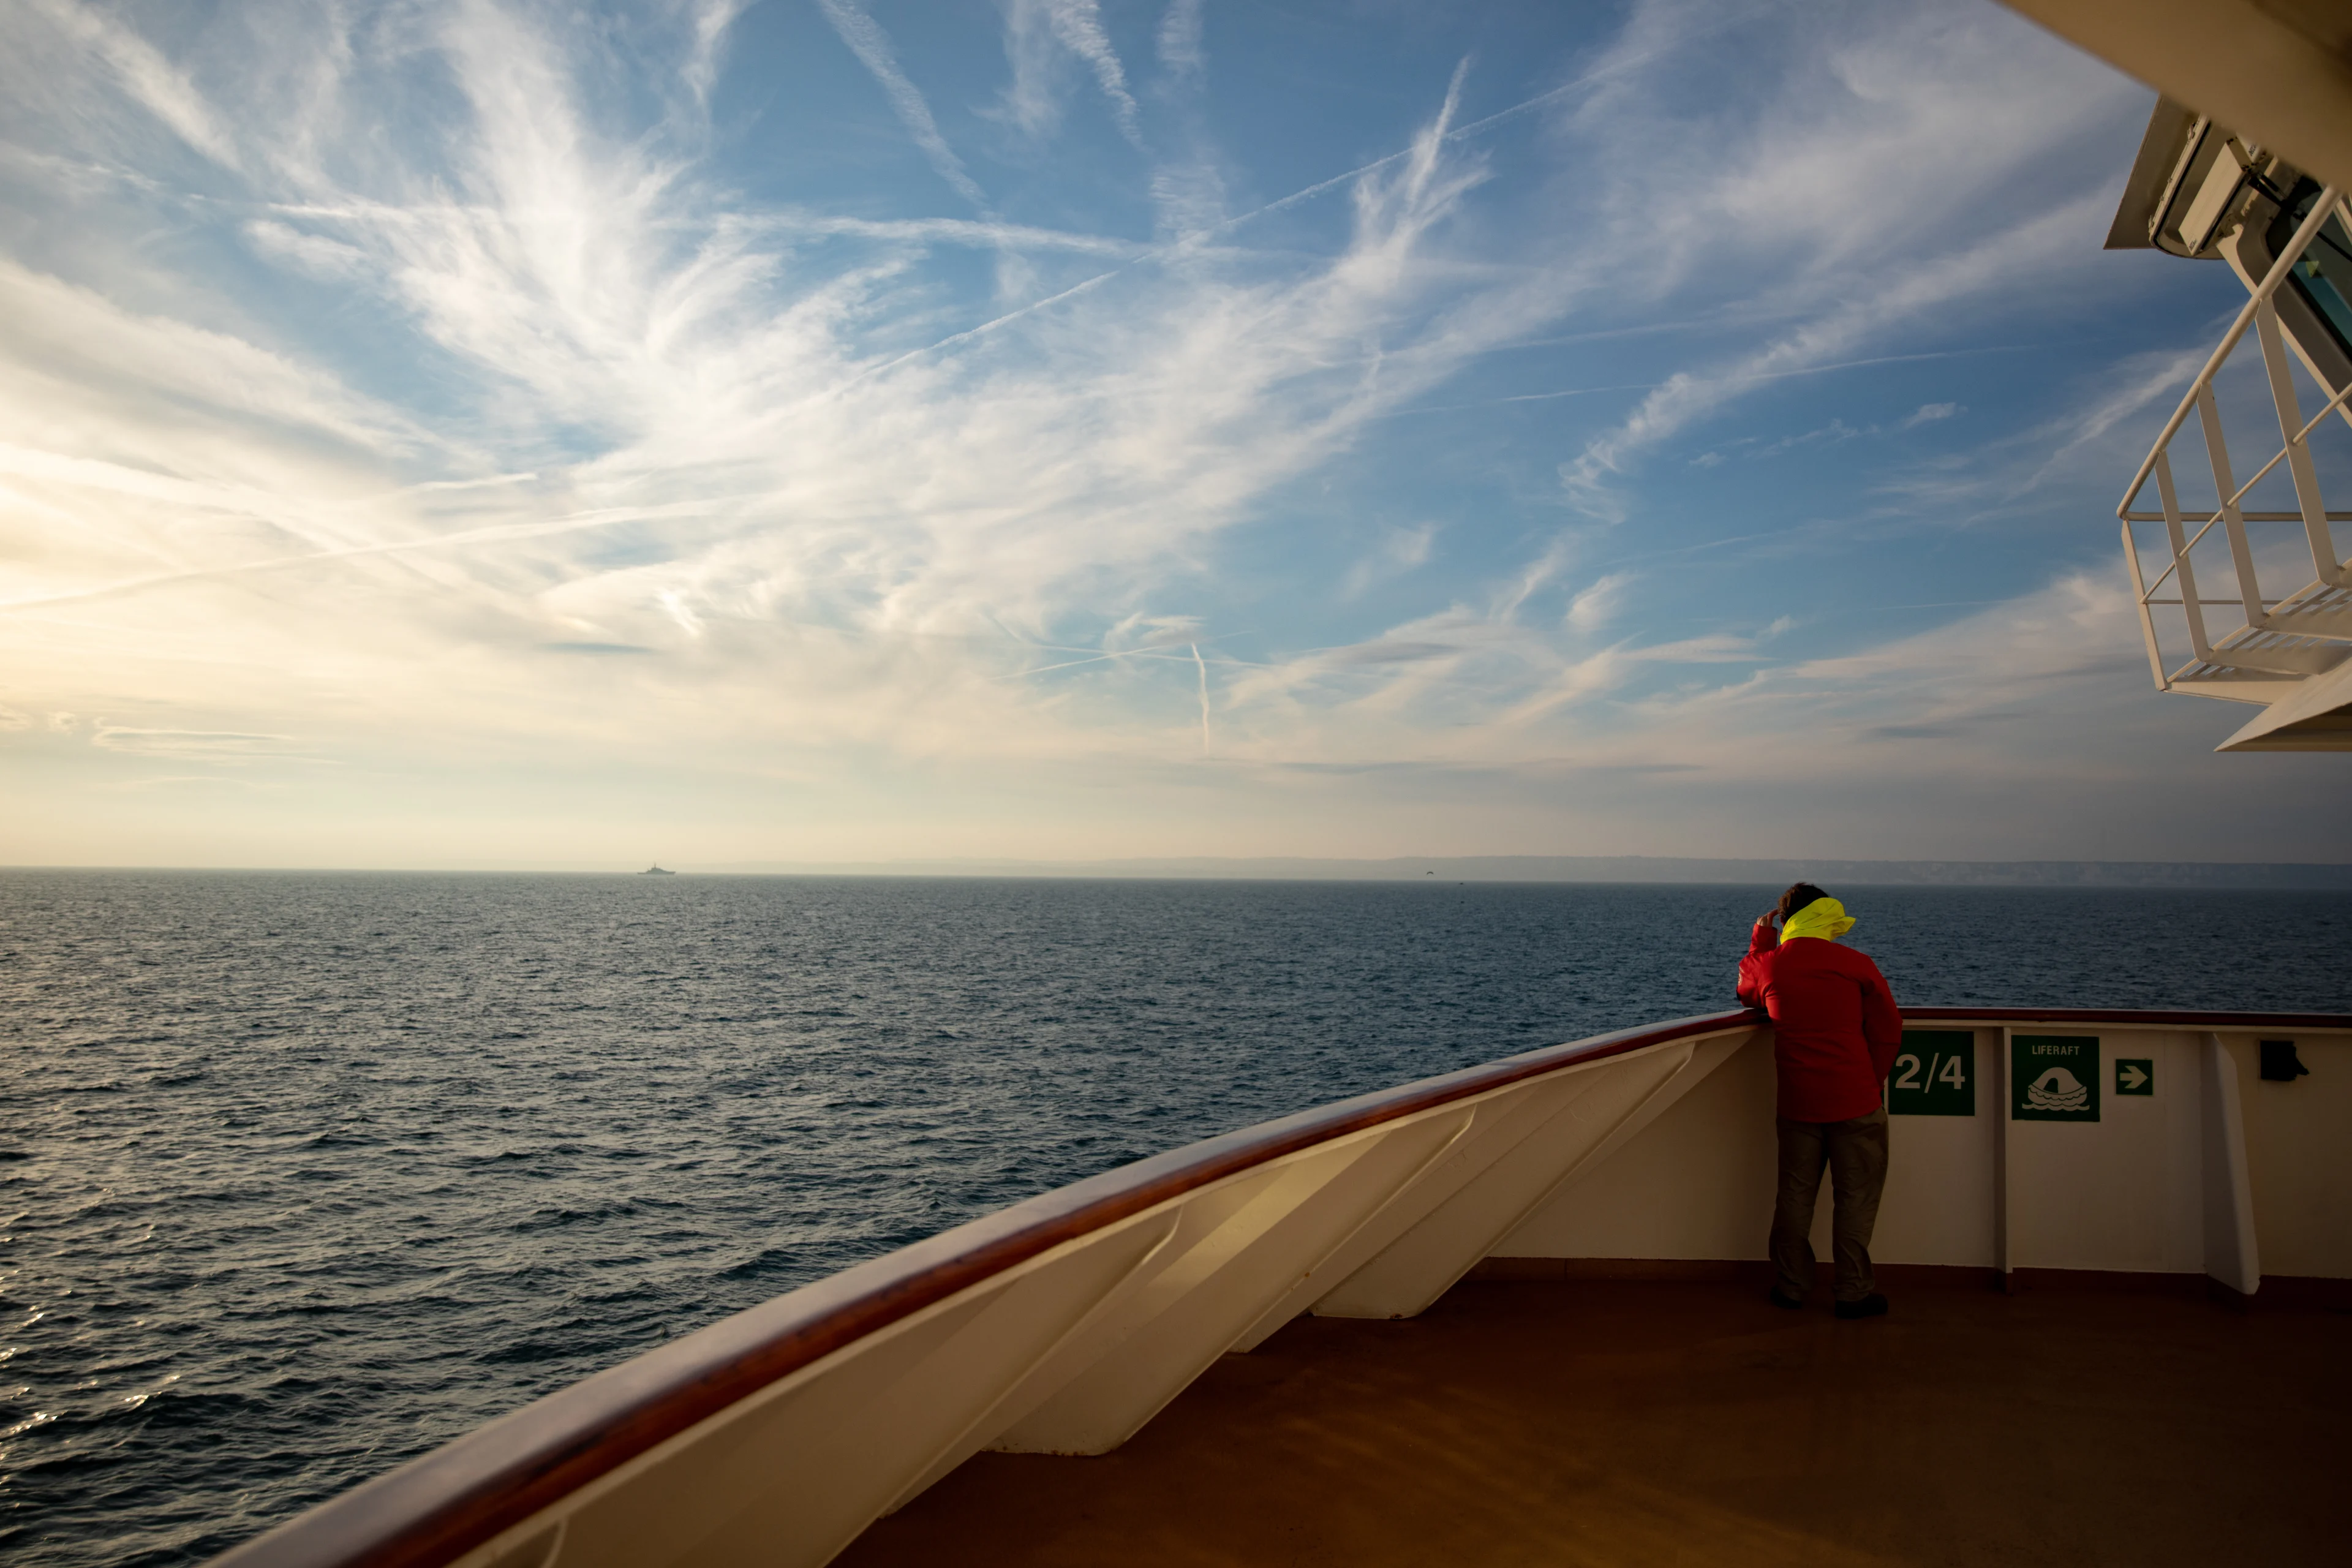 Guest enjoying the view from the stern of MS Maud. Photo: Tom Woodstock/Ultrasharp